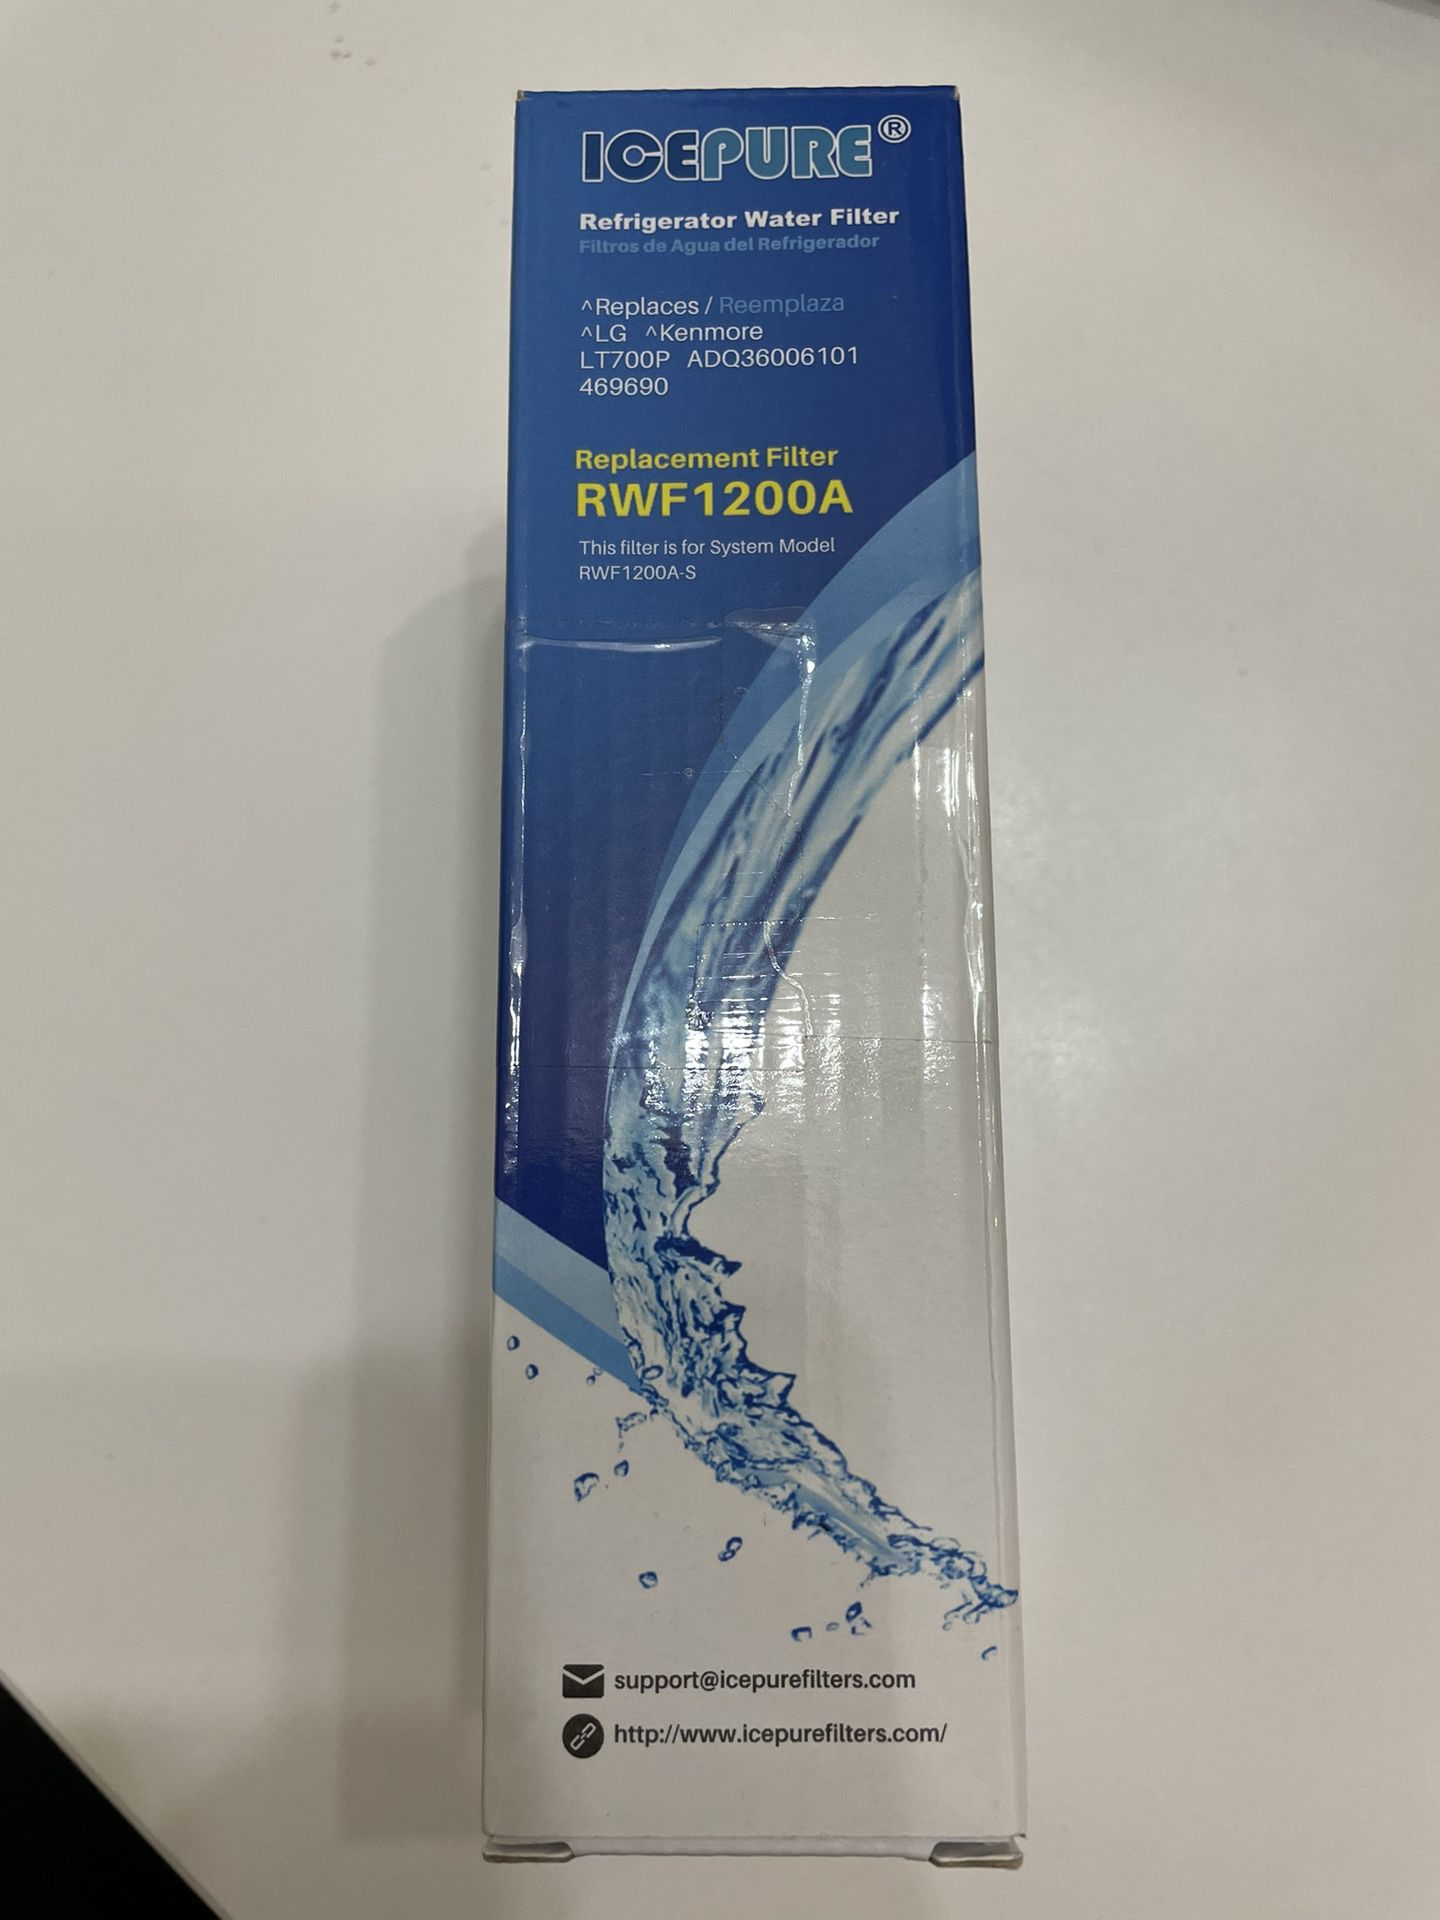 LG Fridge Water Filter Replacement RWF1200A